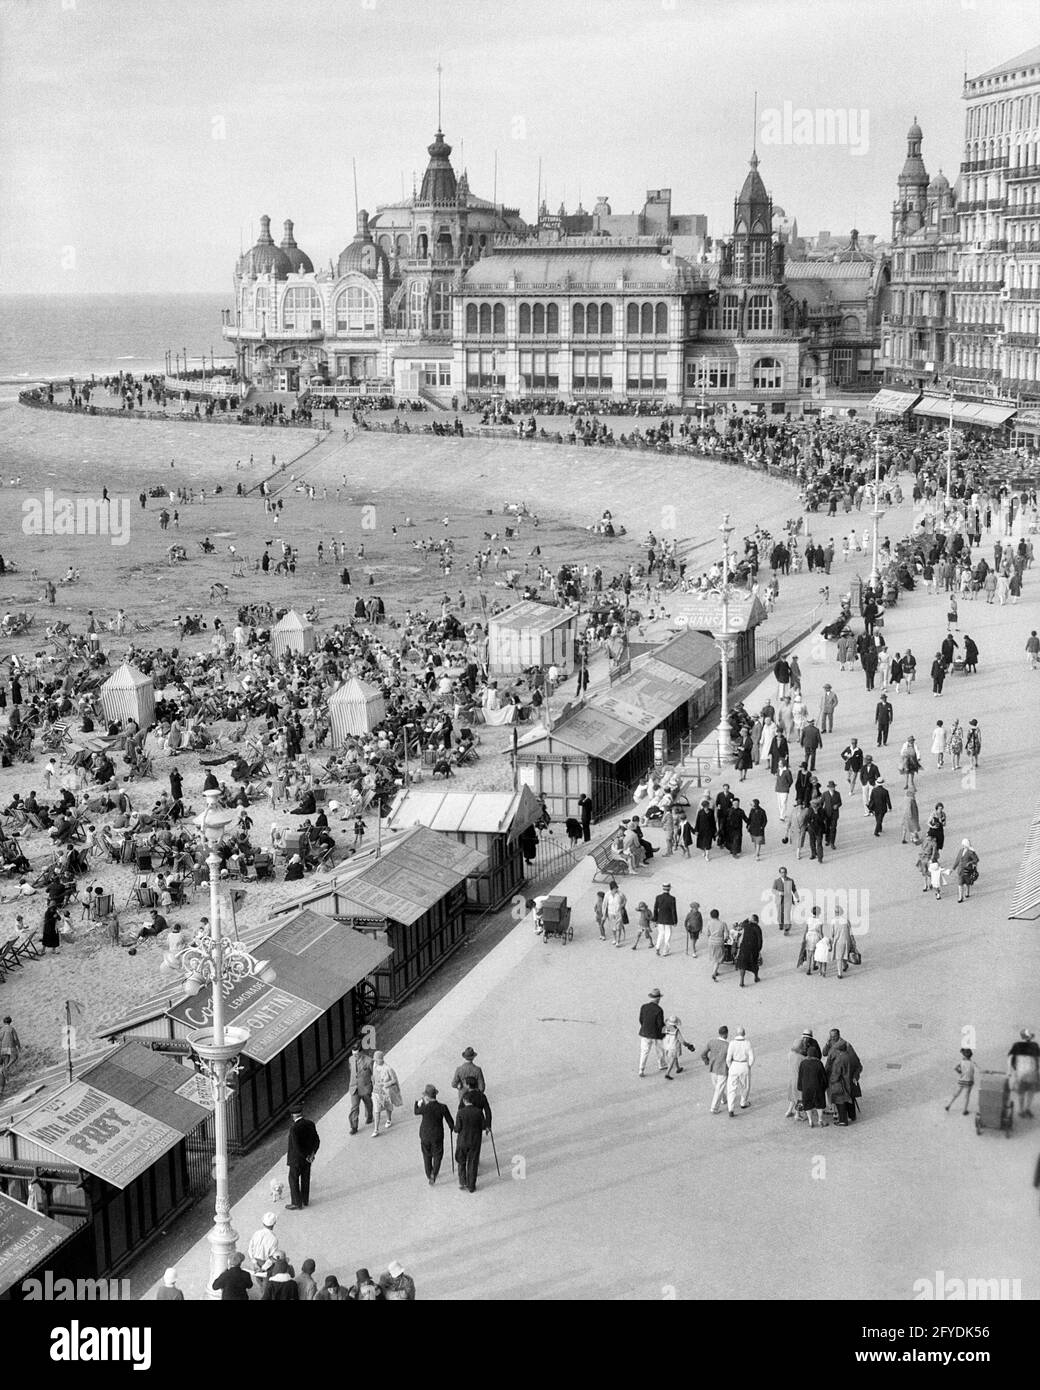 1920s THE KURSAAL CASINO AT THE END OF THE BEACH DESTROYED DURING WORLD WAR TWO OSTEND BELGIUM - r4429 HAR001 HARS PROPERTY EXTERIOR WORLD WARS BELGIAN WORLD WAR WORLD WAR TWO WORLD WAR II THE BEACHES REAL ESTATE STRUCTURES CASINO PROMENADE SANDY WORLD WAR 2 EDIFICE PROVINCE BLACK AND WHITE DESTROYED HAR001 OLD FASHIONED Stock Photo